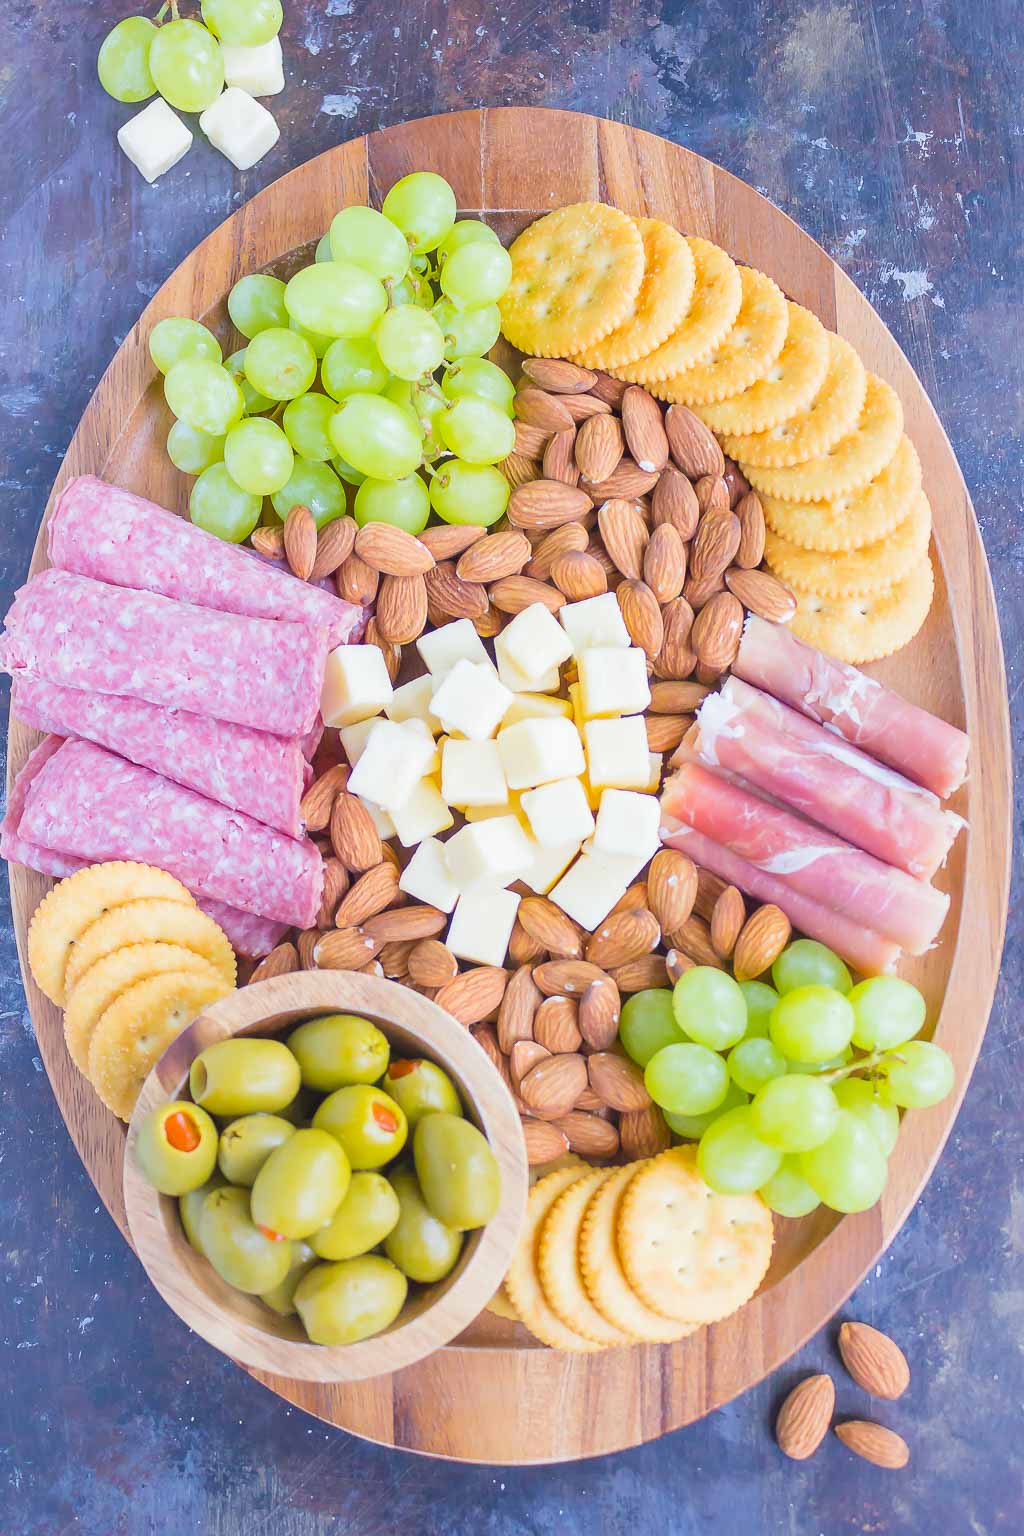 This Easy Cheese Board is the perfect appetizer that's ready in less than 10 minutes. With a delicious mix of meats, cheese, crackers, and more, this simple platter will wow just about everyone! #cheeseboard #cheeseplate #appetizer